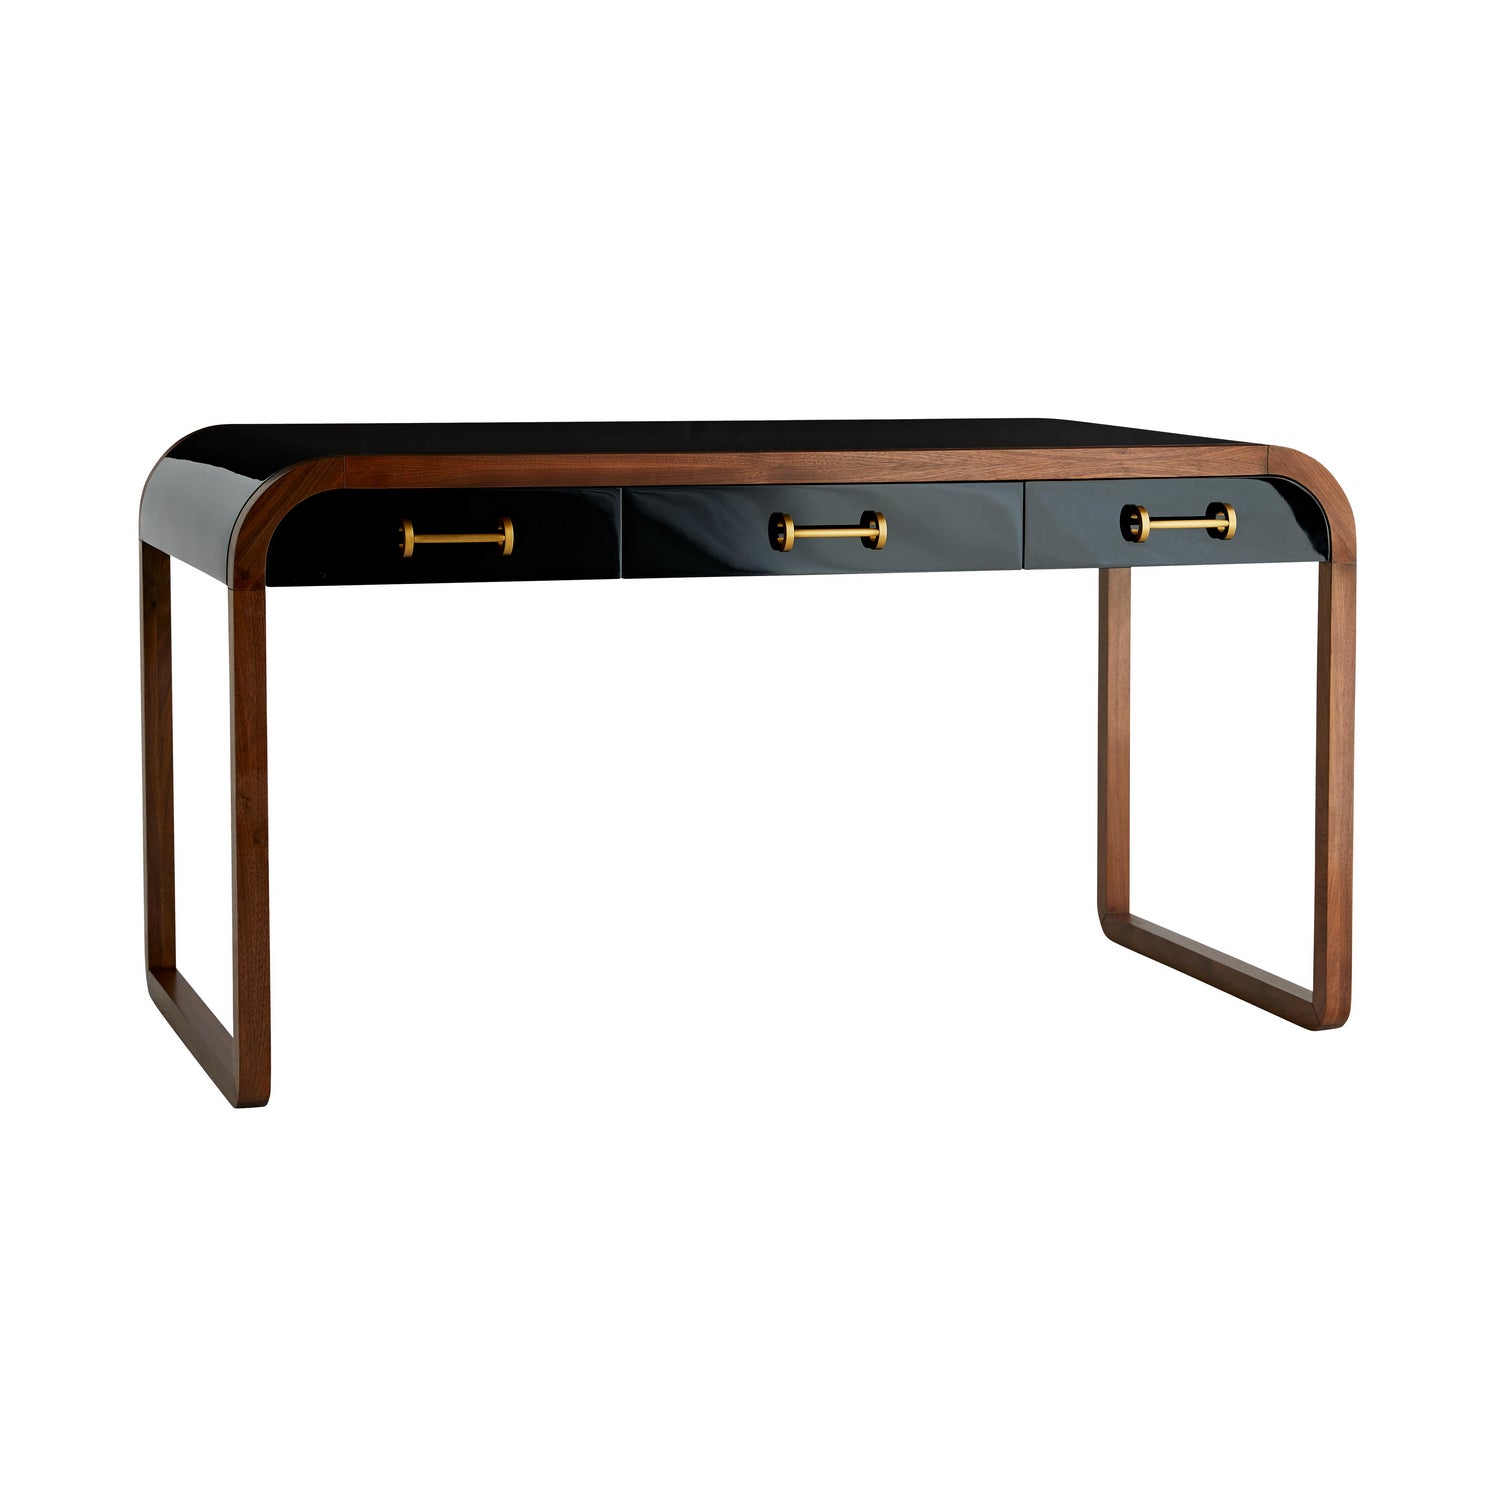 Desk from the Victoria collection in Black Gloss Lacquer finish